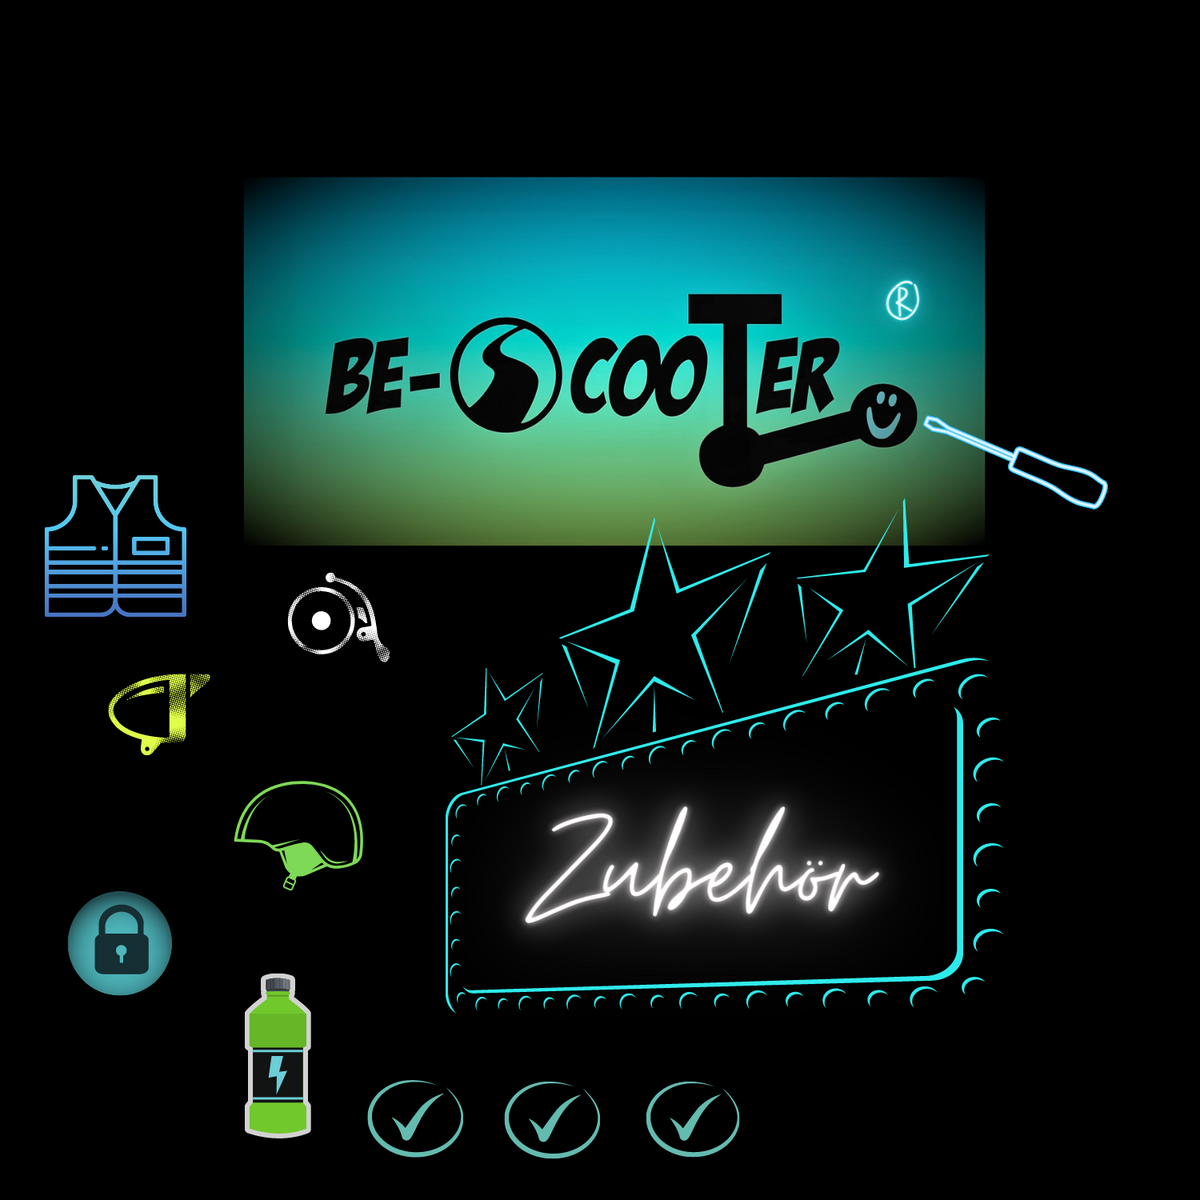 E-SCooTER ZUBEHÖR – BE-SCooTER® SToRE oNLINE!